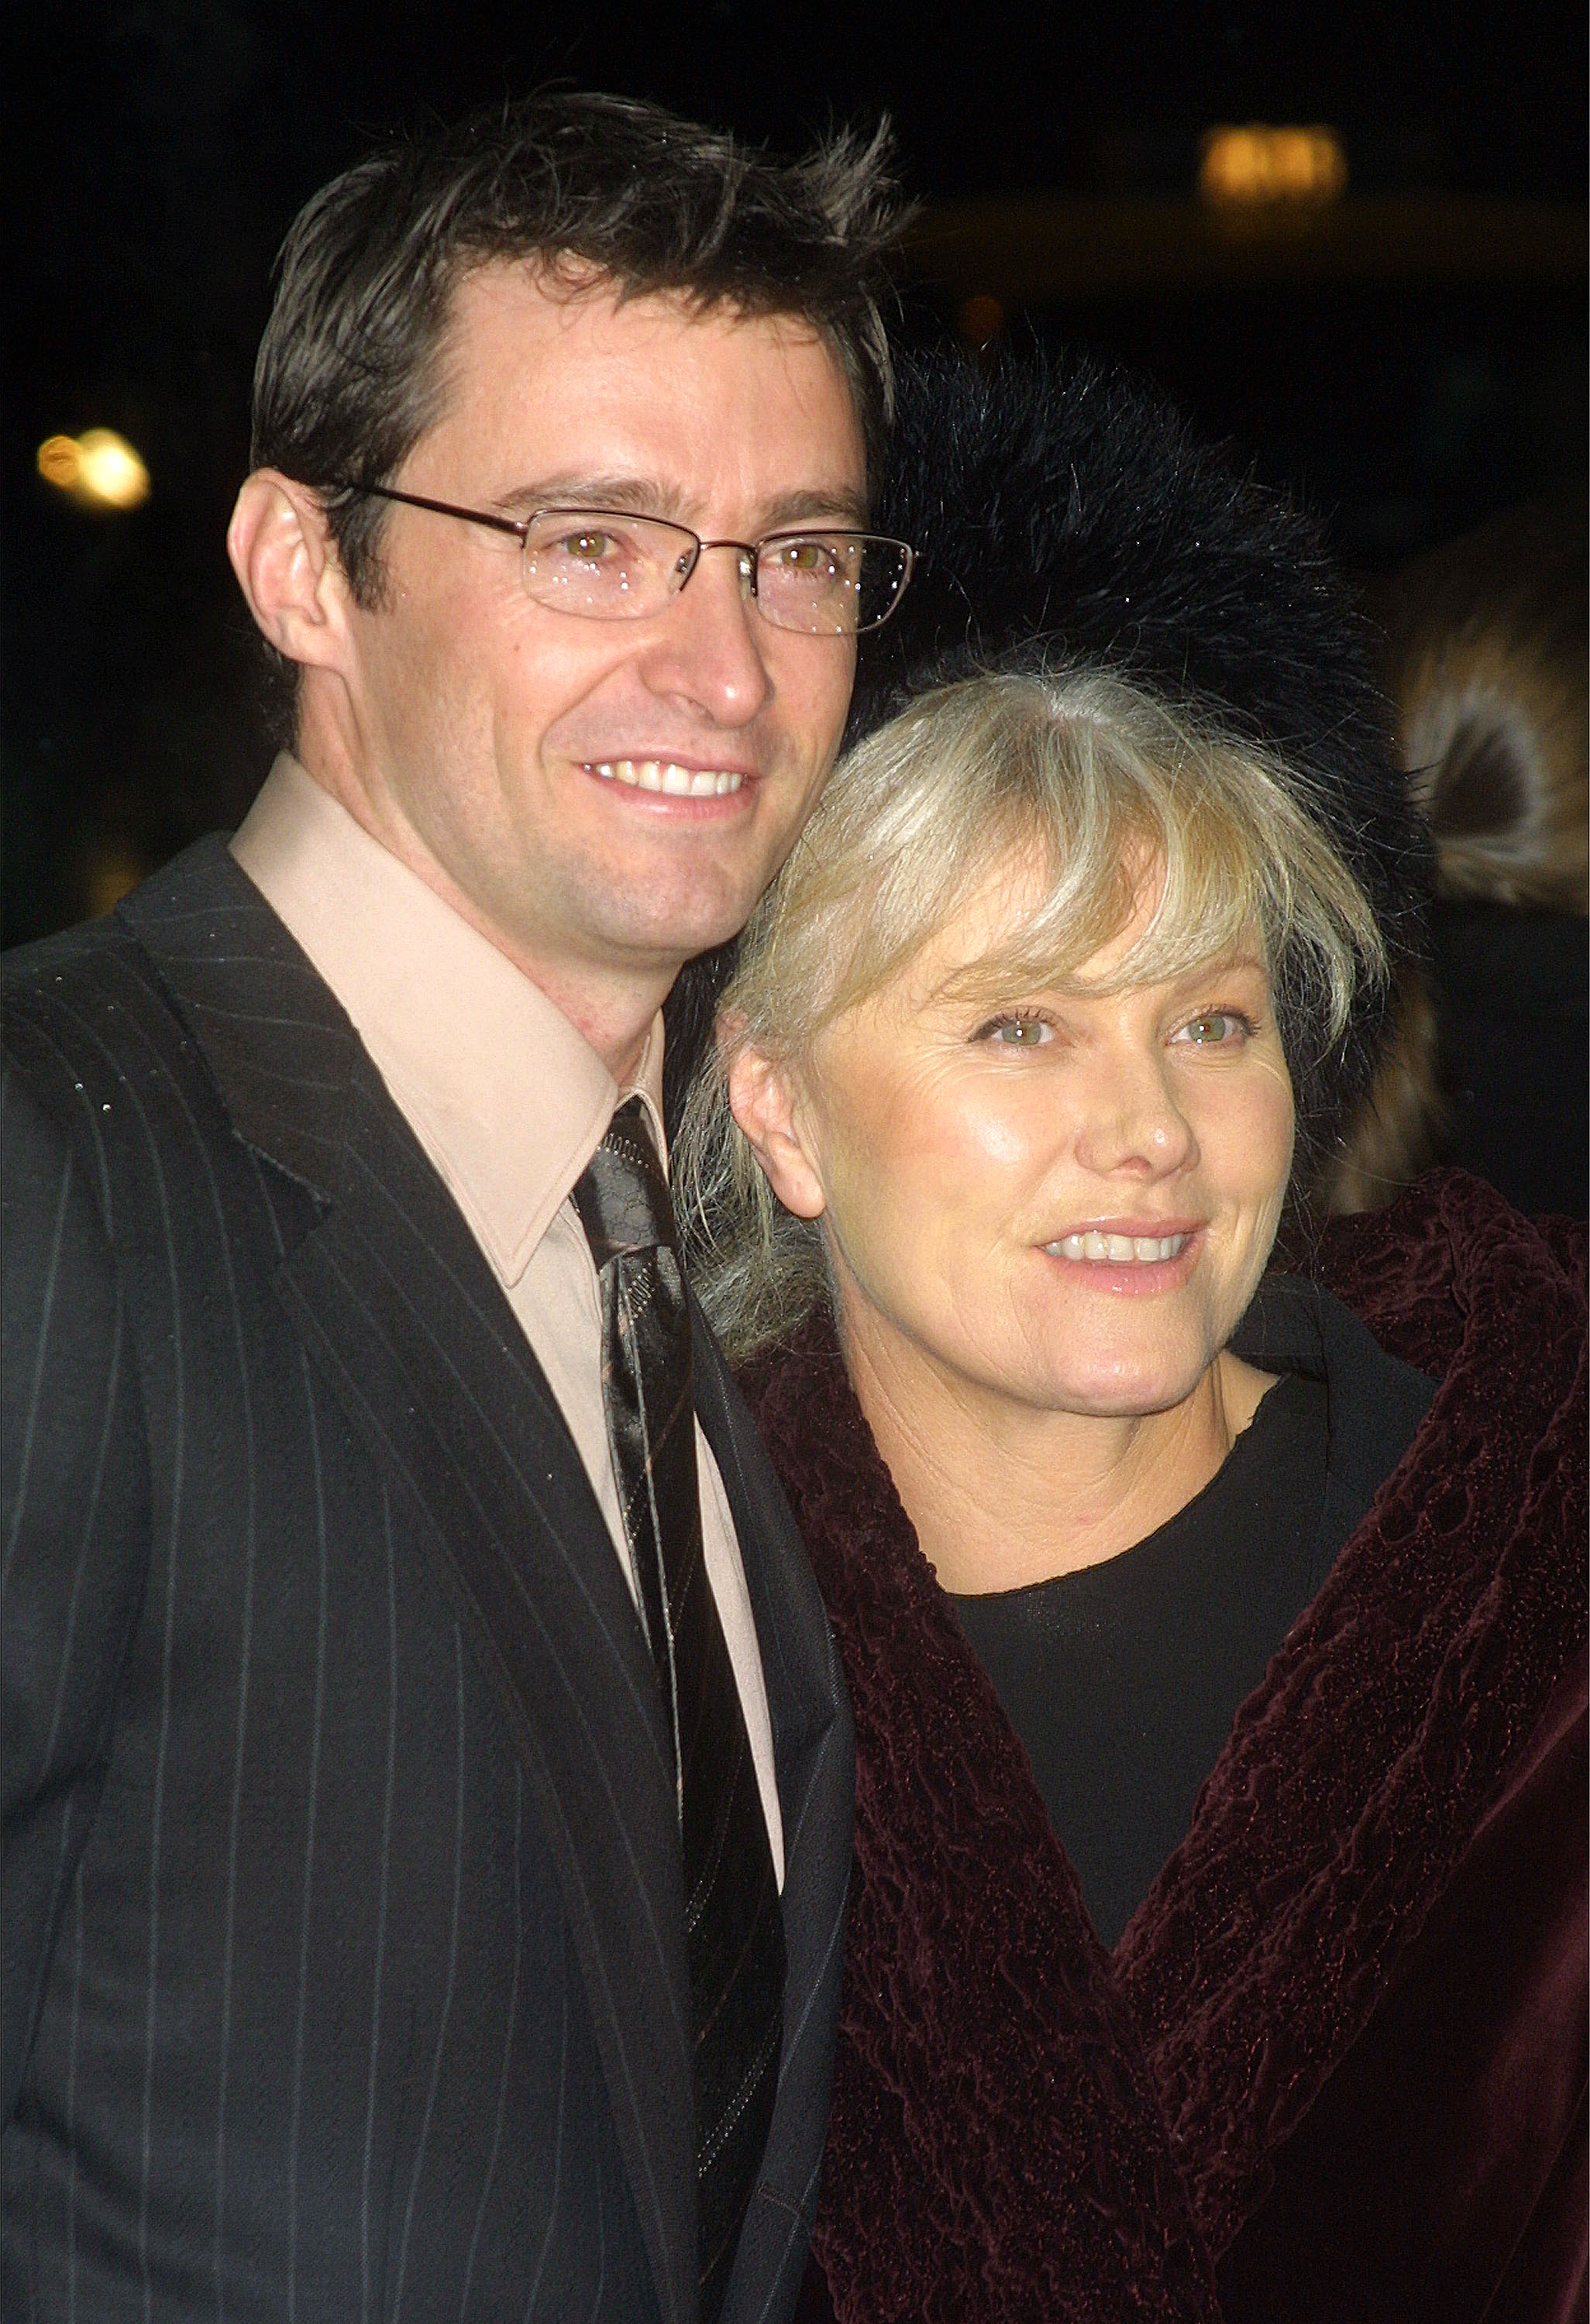 Hugh Jackman and his wife Deborra Furness in New York in 2003 | Source: Getty Images